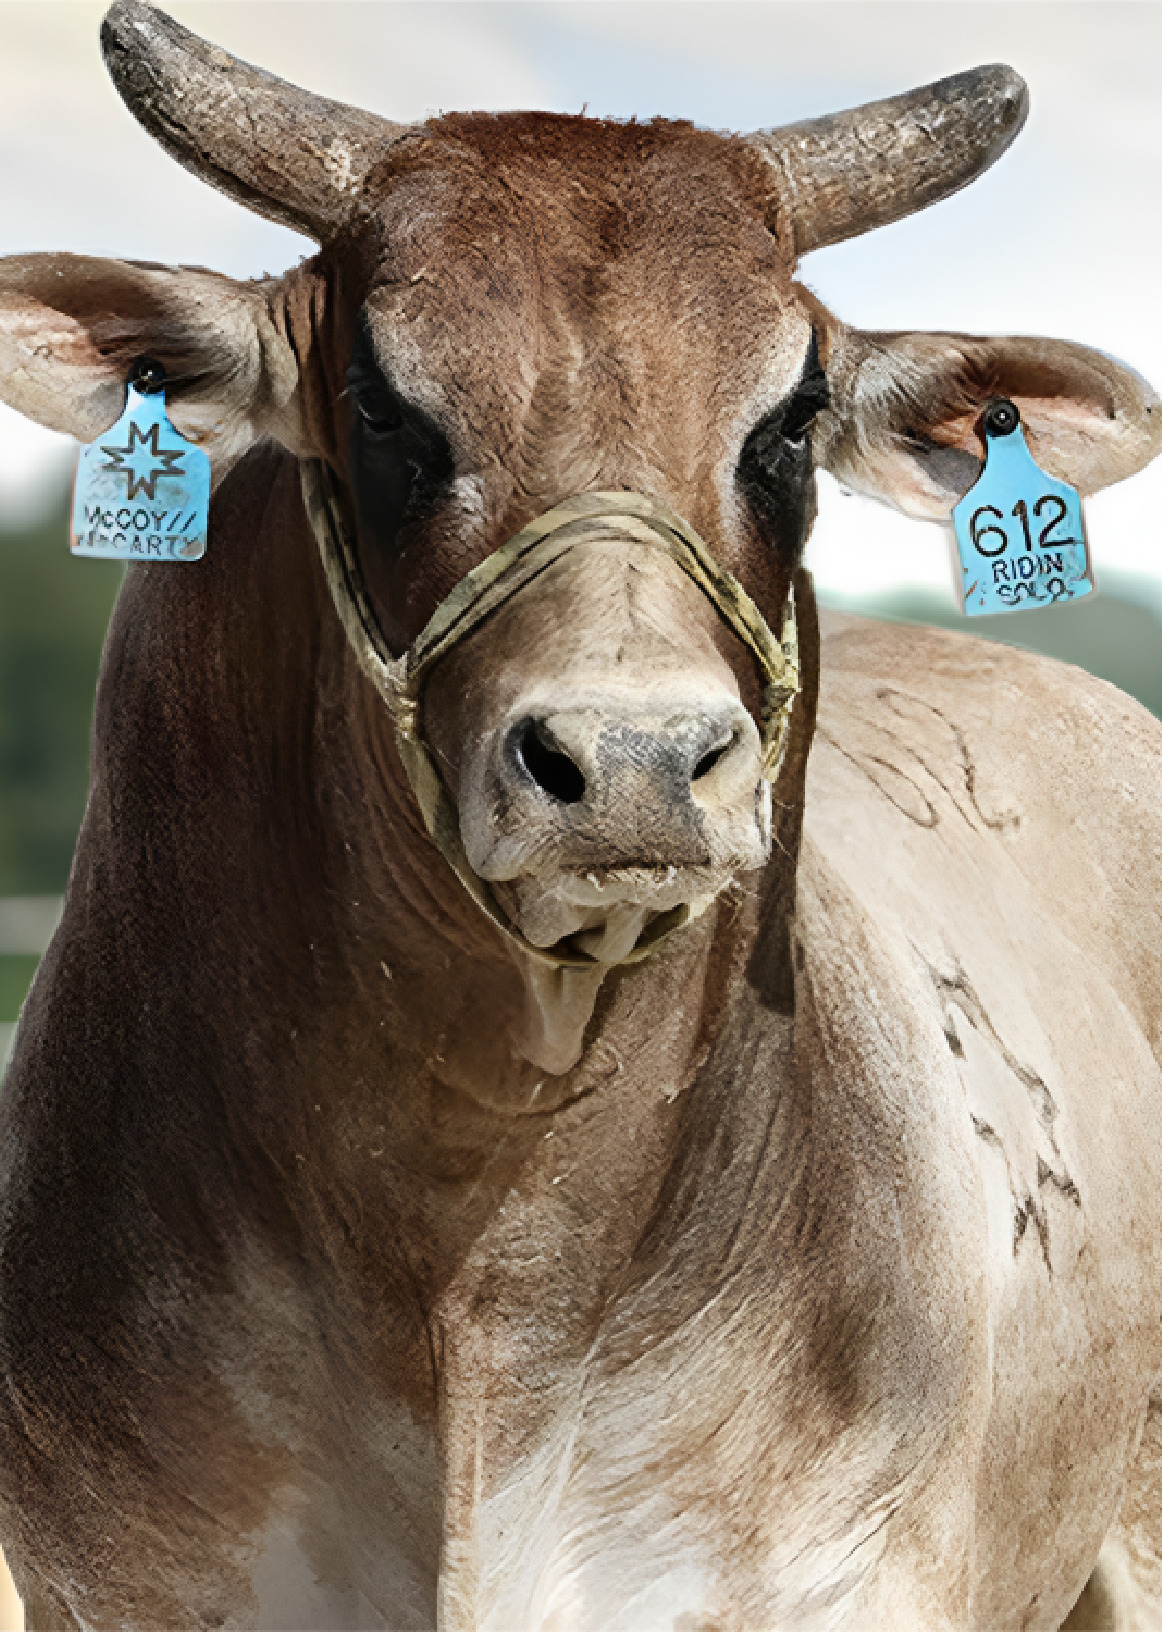 bovine with tag on ear